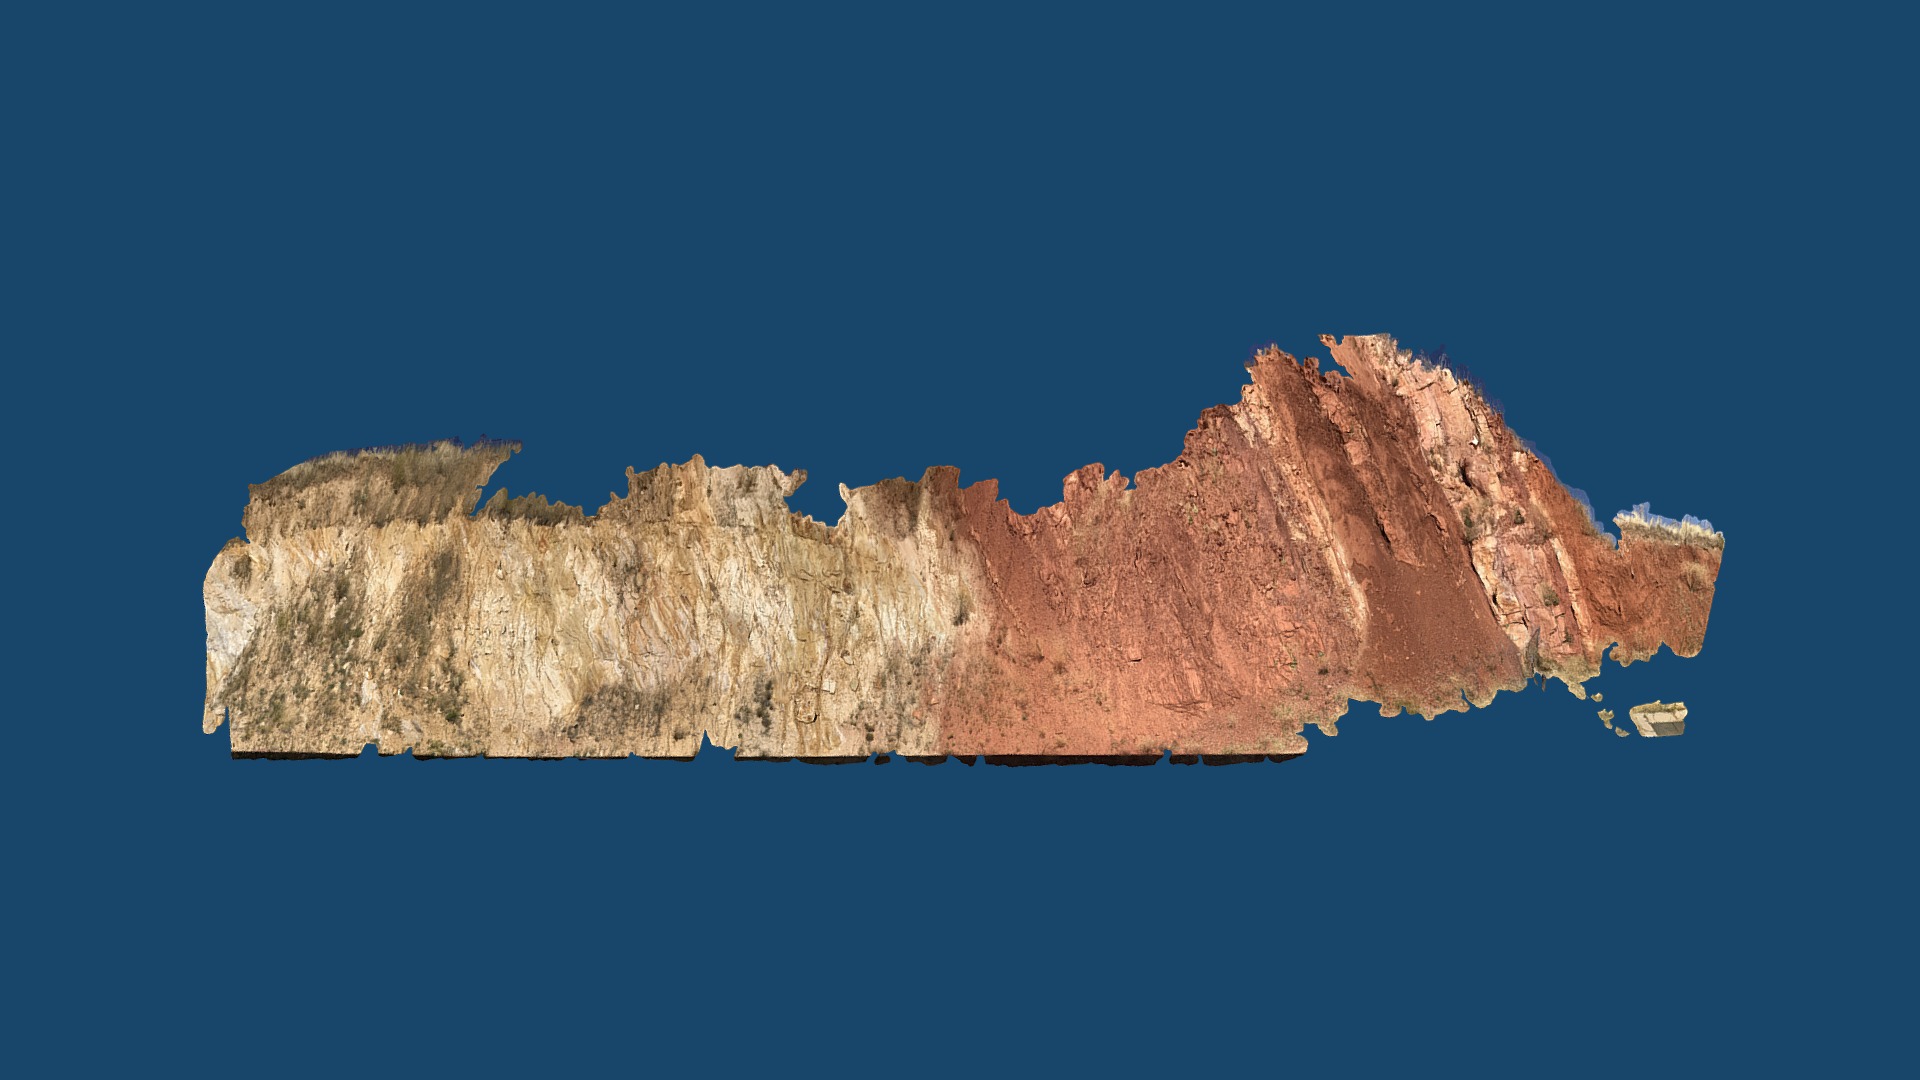 3D model Lykins Formation – Golden, CO - This is a 3D model of the Lykins Formation - Golden, CO. The 3D model is about a large rock formation.